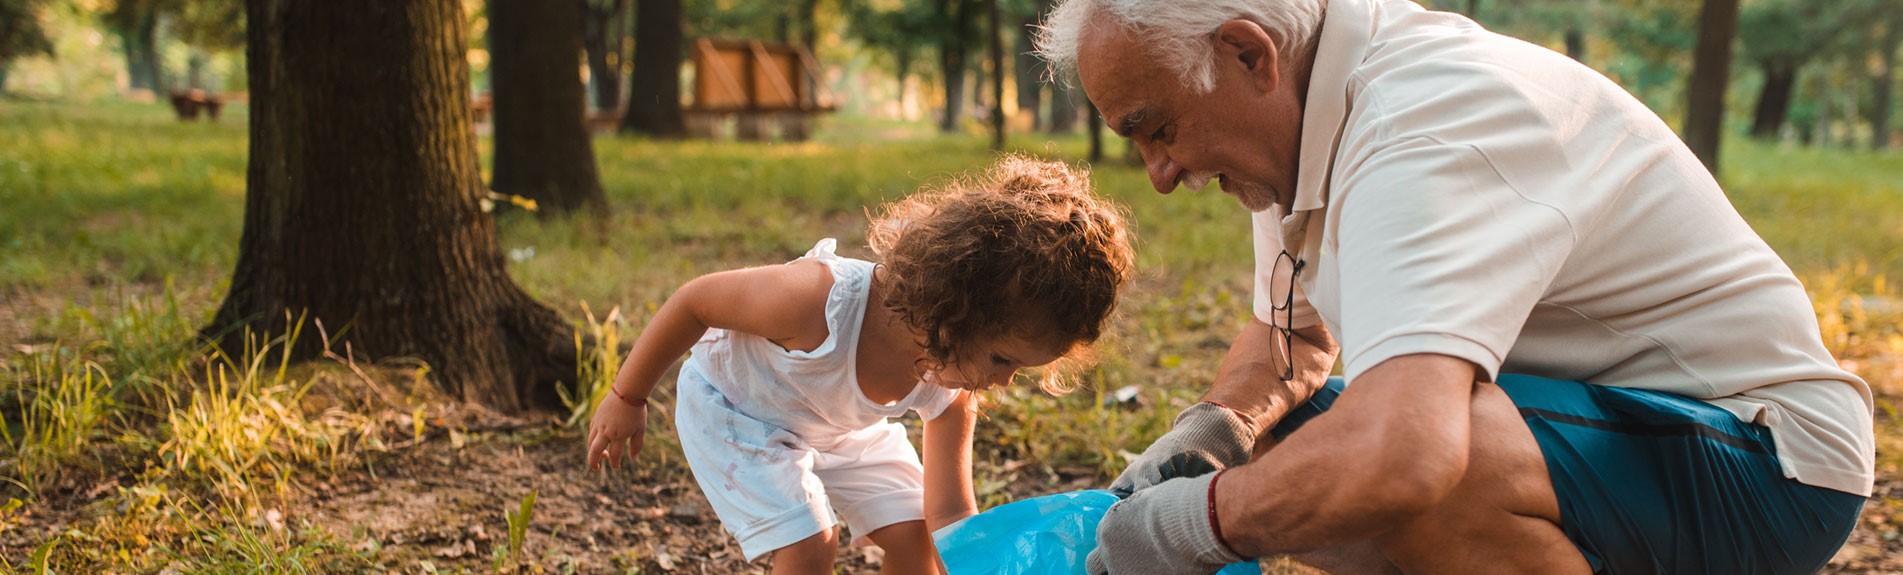 Grandpa And His Granddaughter Keeping The Environment Clean